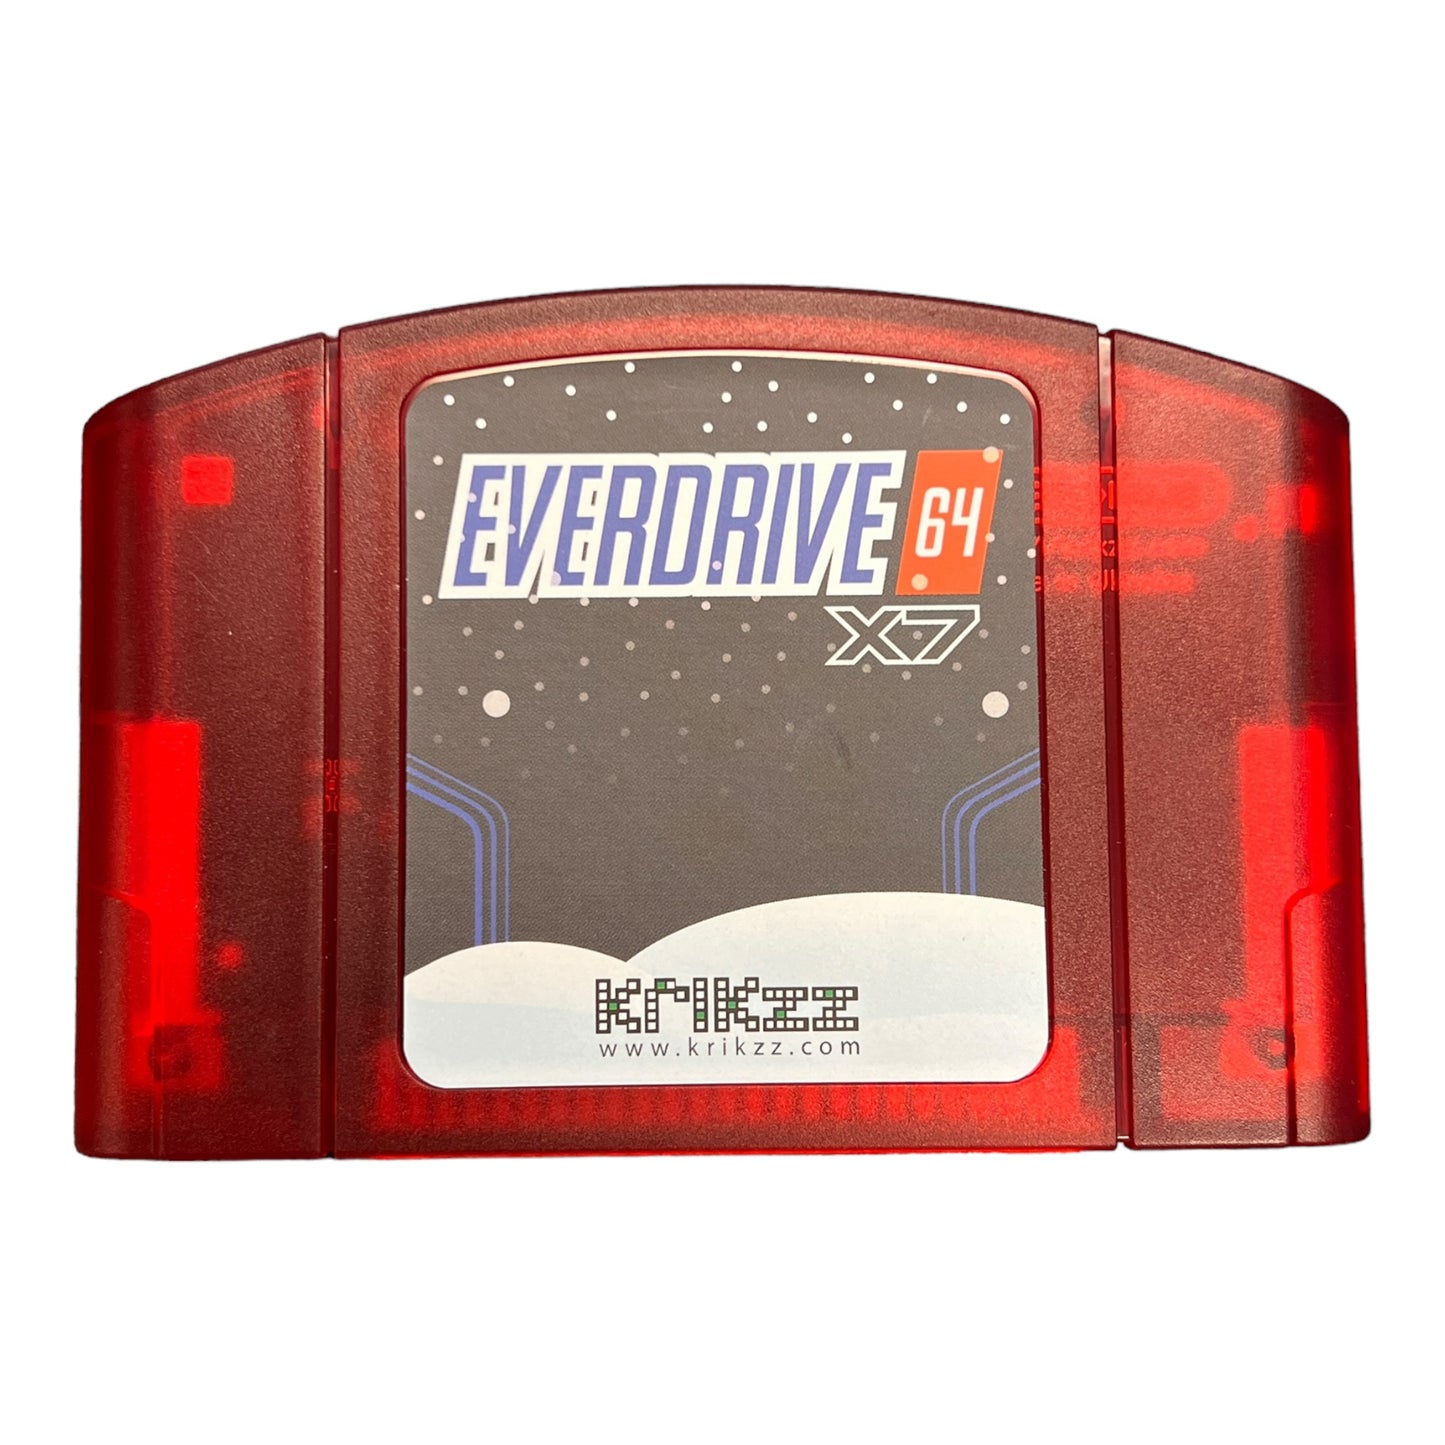 Everdrive 64 X7 Red Snow Edition